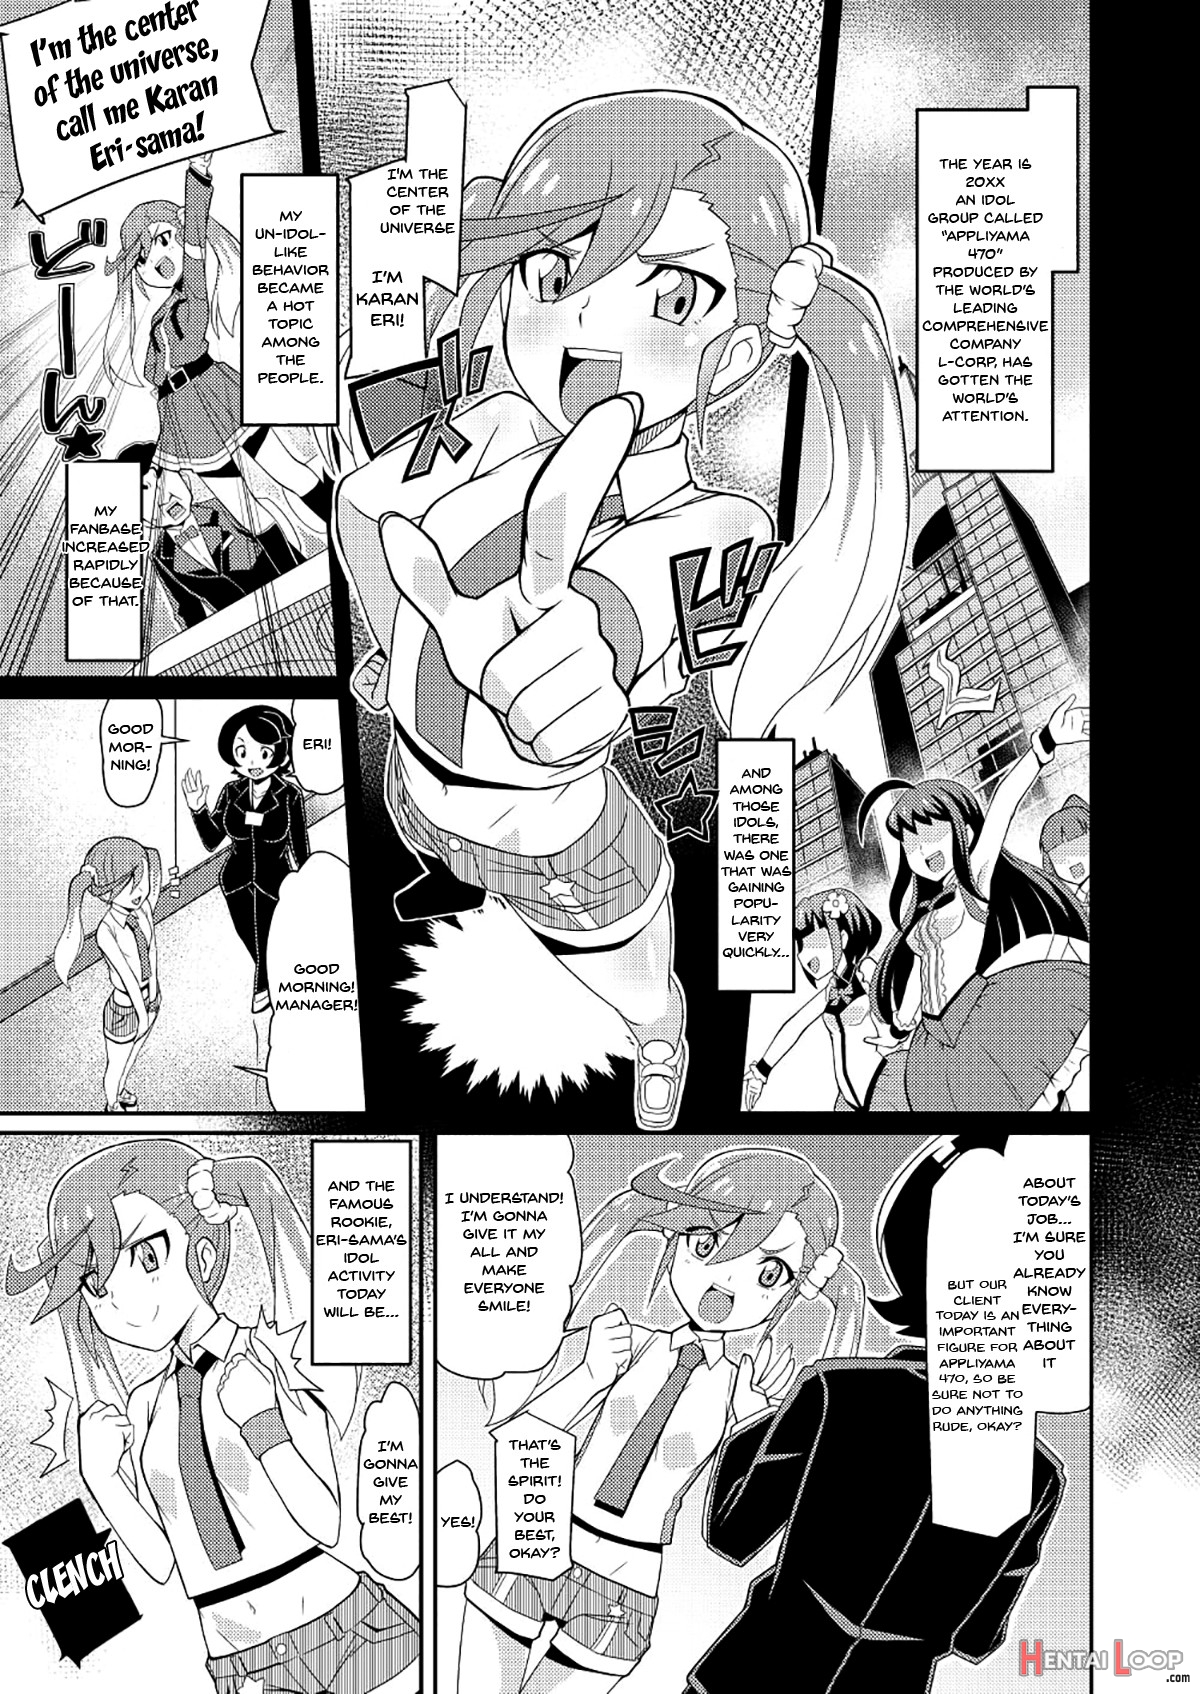 Eri-sama's Open For Business page 2